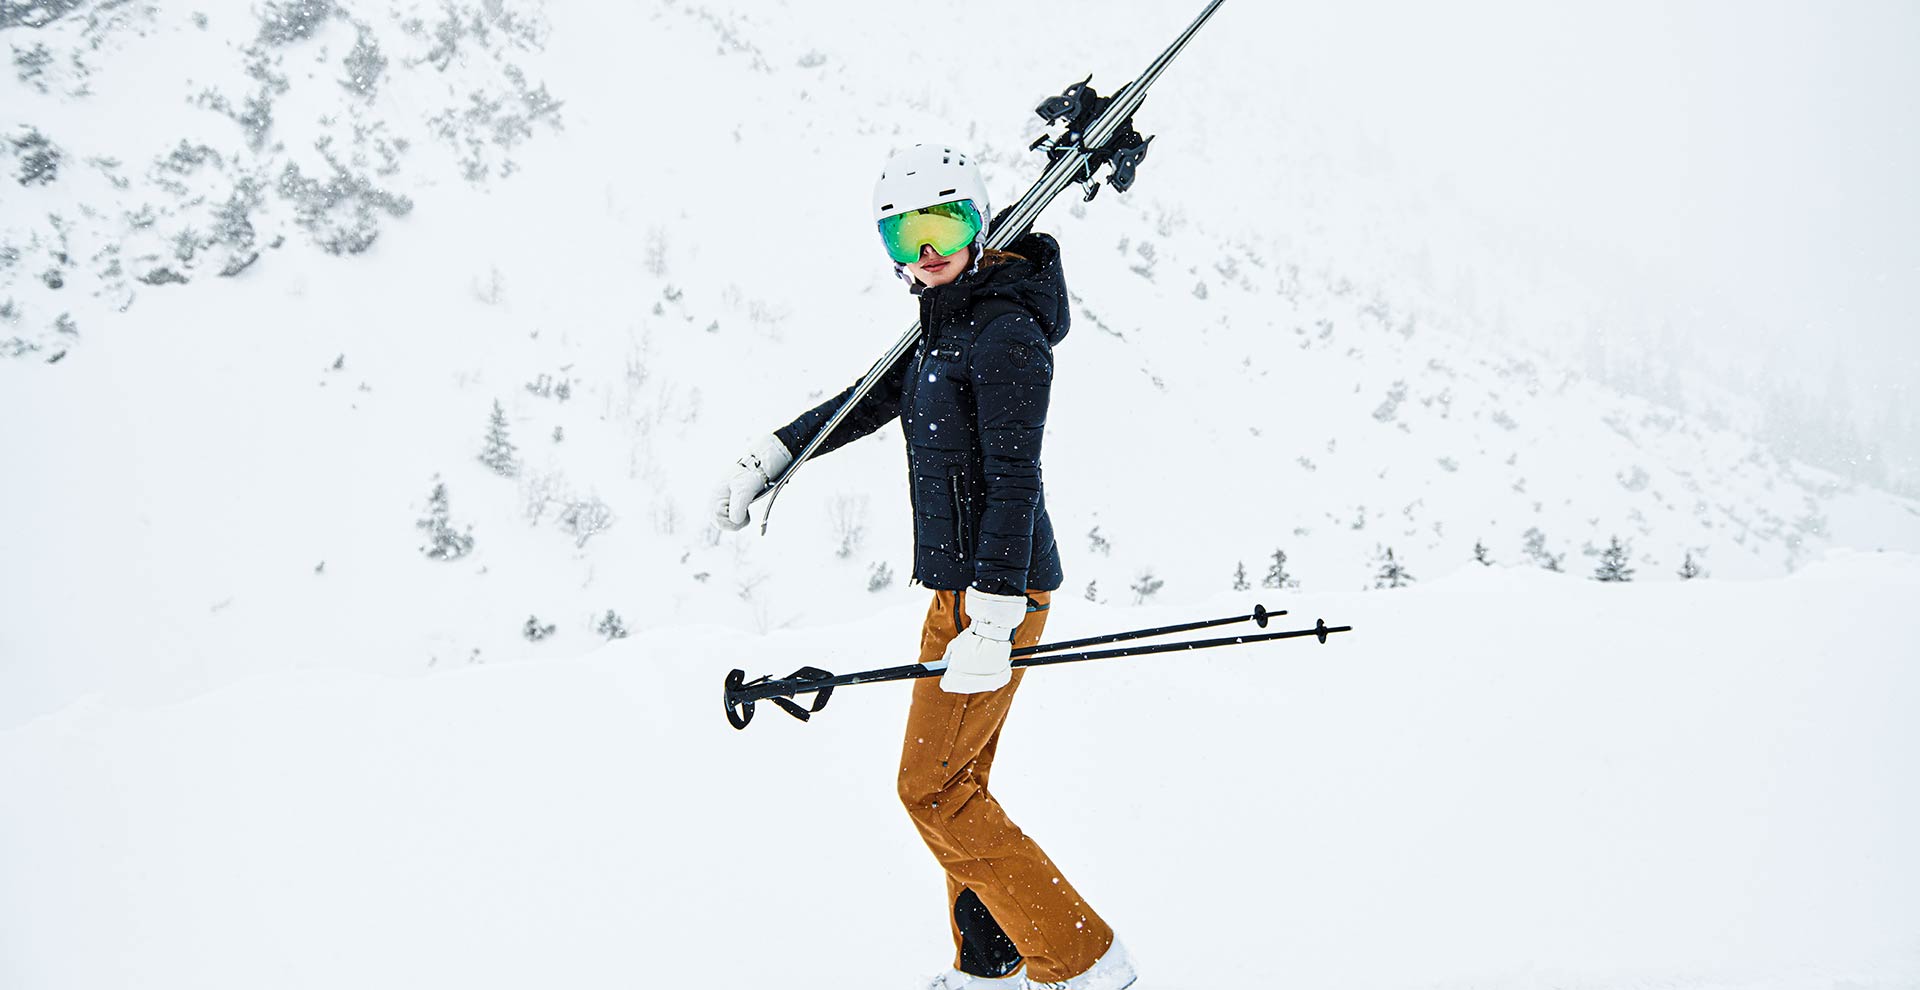 What to wear for skiing and snowboarding